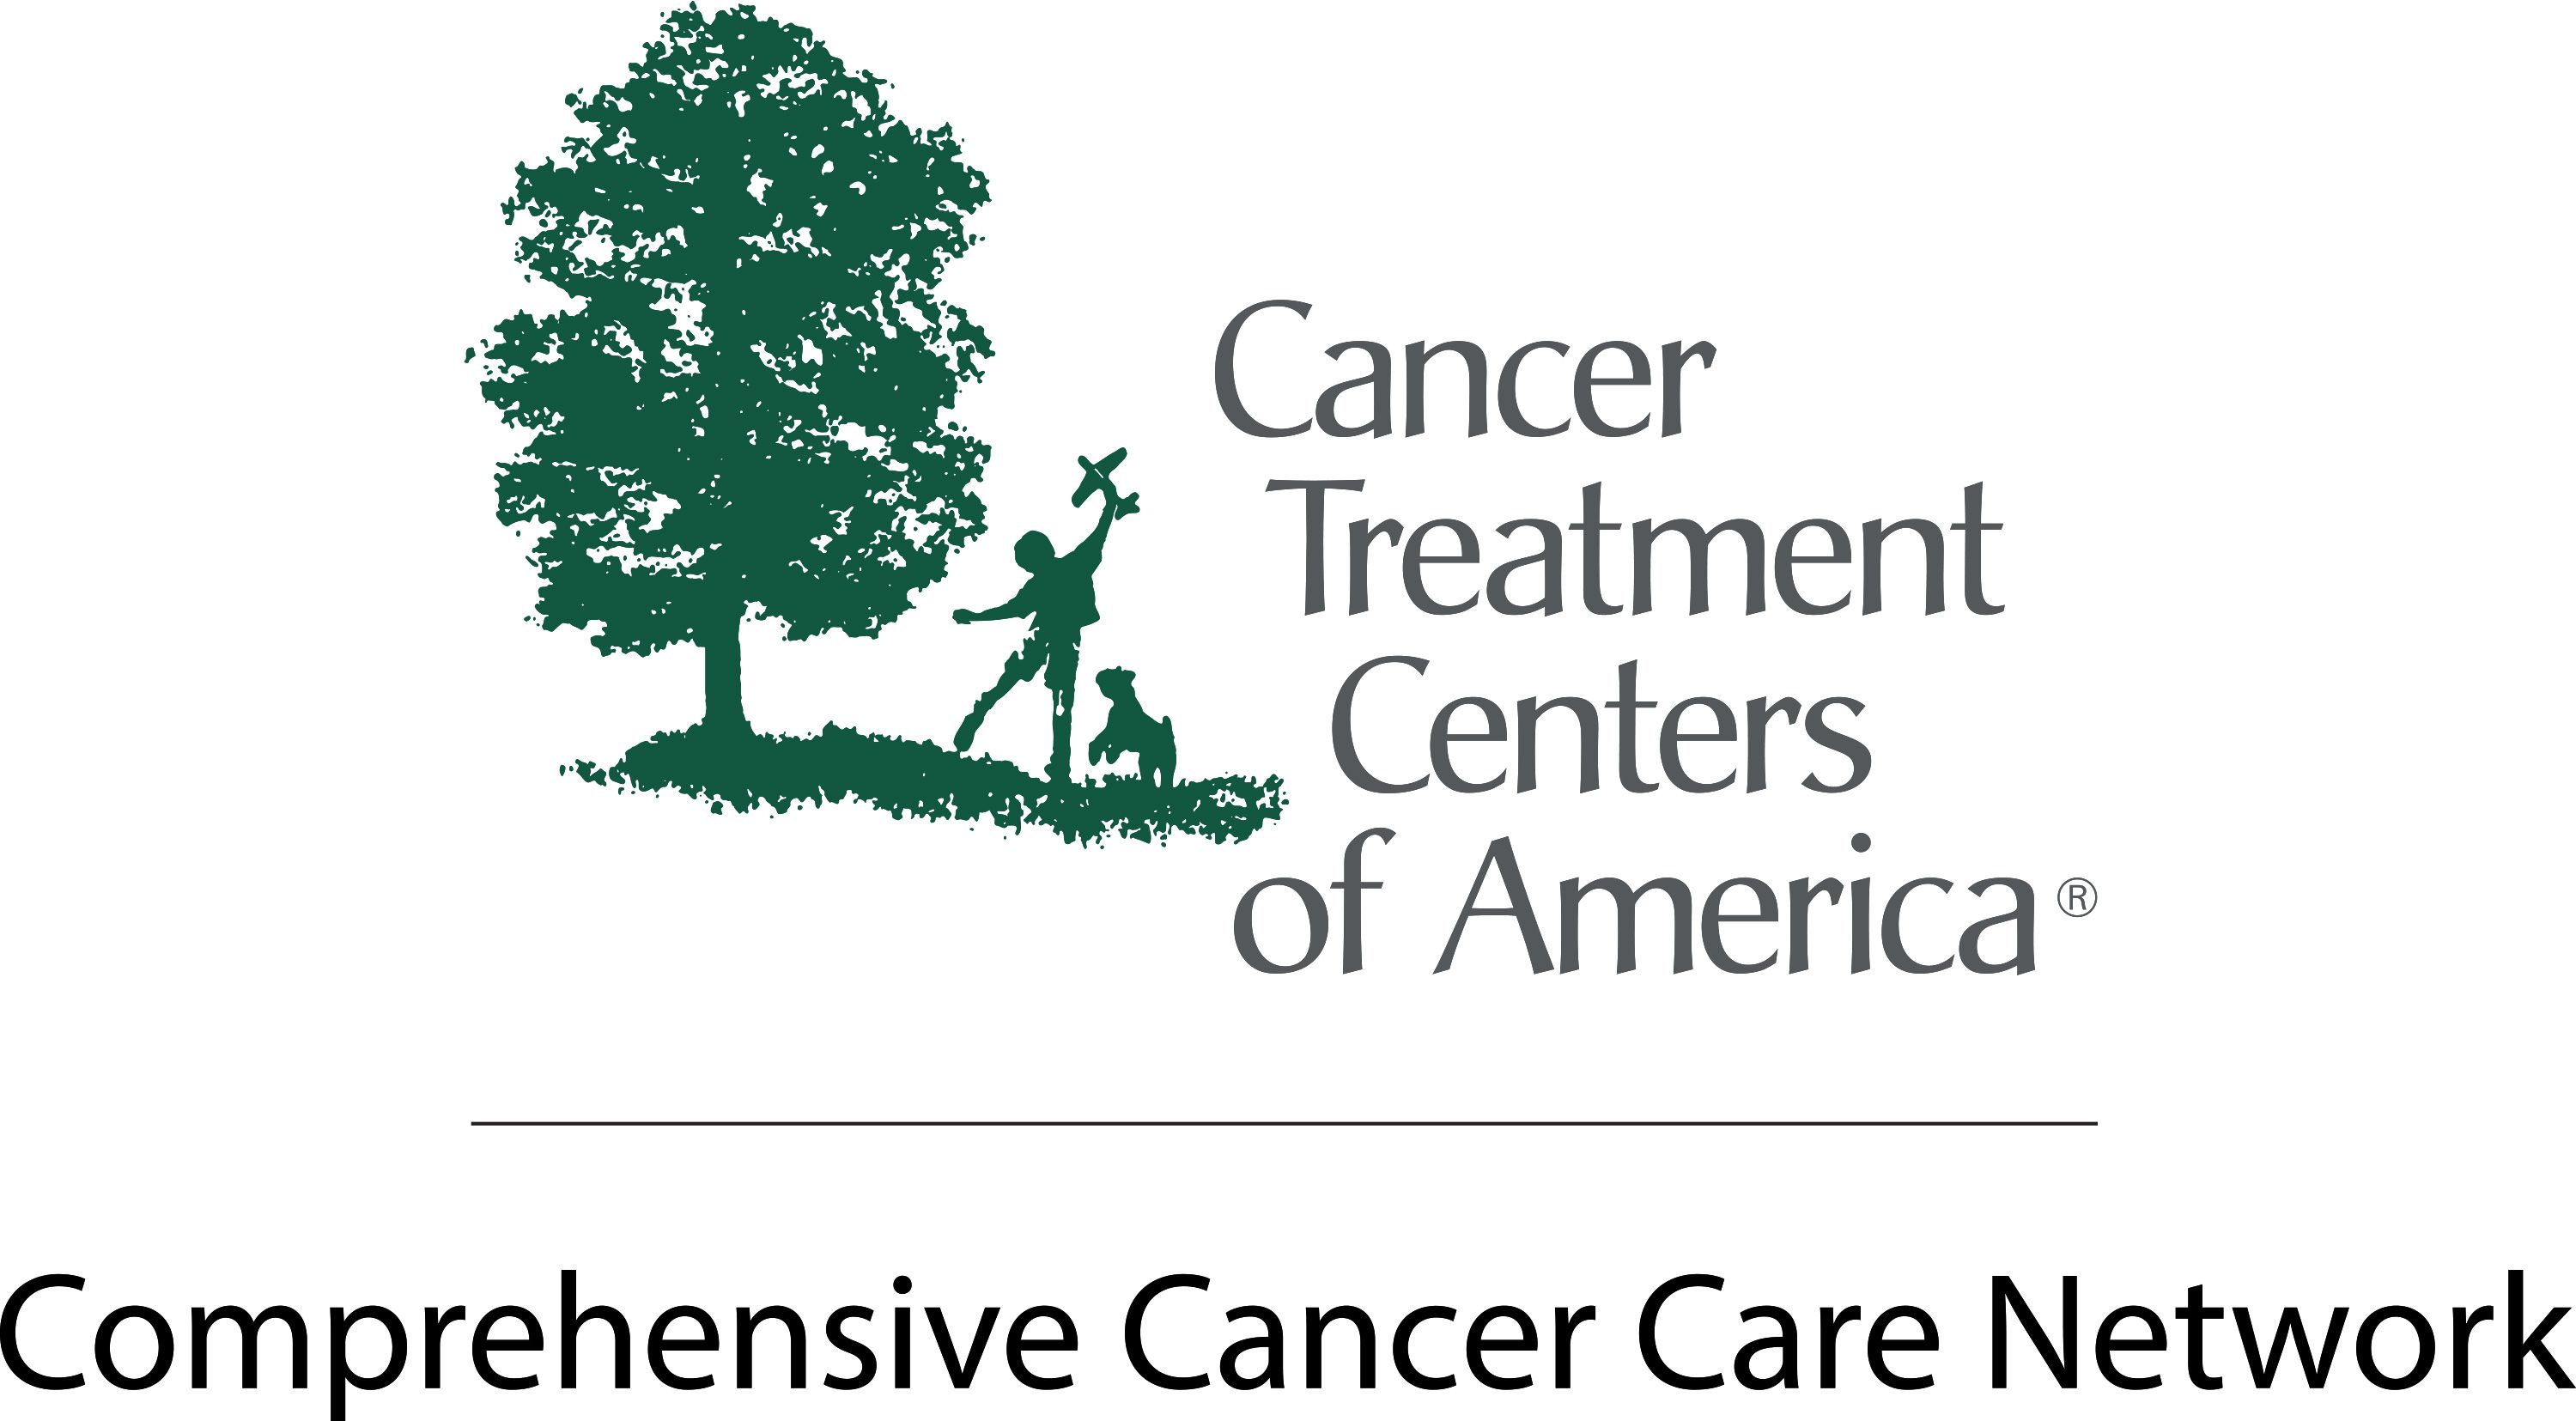 Cancer Remedy Centers of The united states Announces Partnership with MedAllies to Innovate on Notifications for CMS and Service provider Community